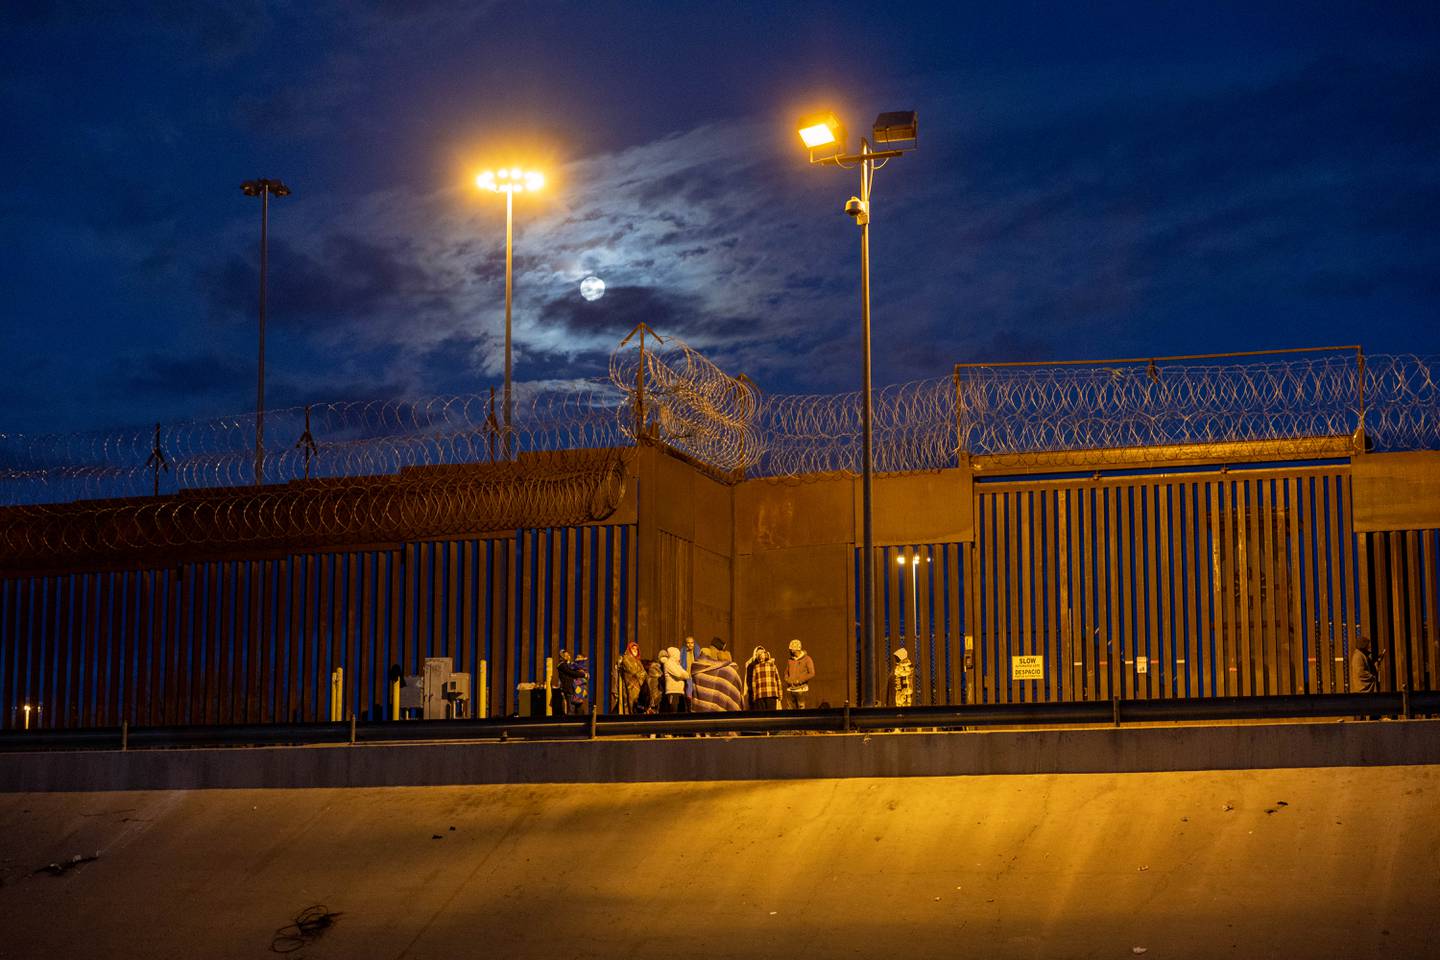 Immigrants wait overnight next to the U.S.-Mexico border fence to seek asylum in the United States on January 7, 2023, as viewed from Ciudad Juarez, Mexico.